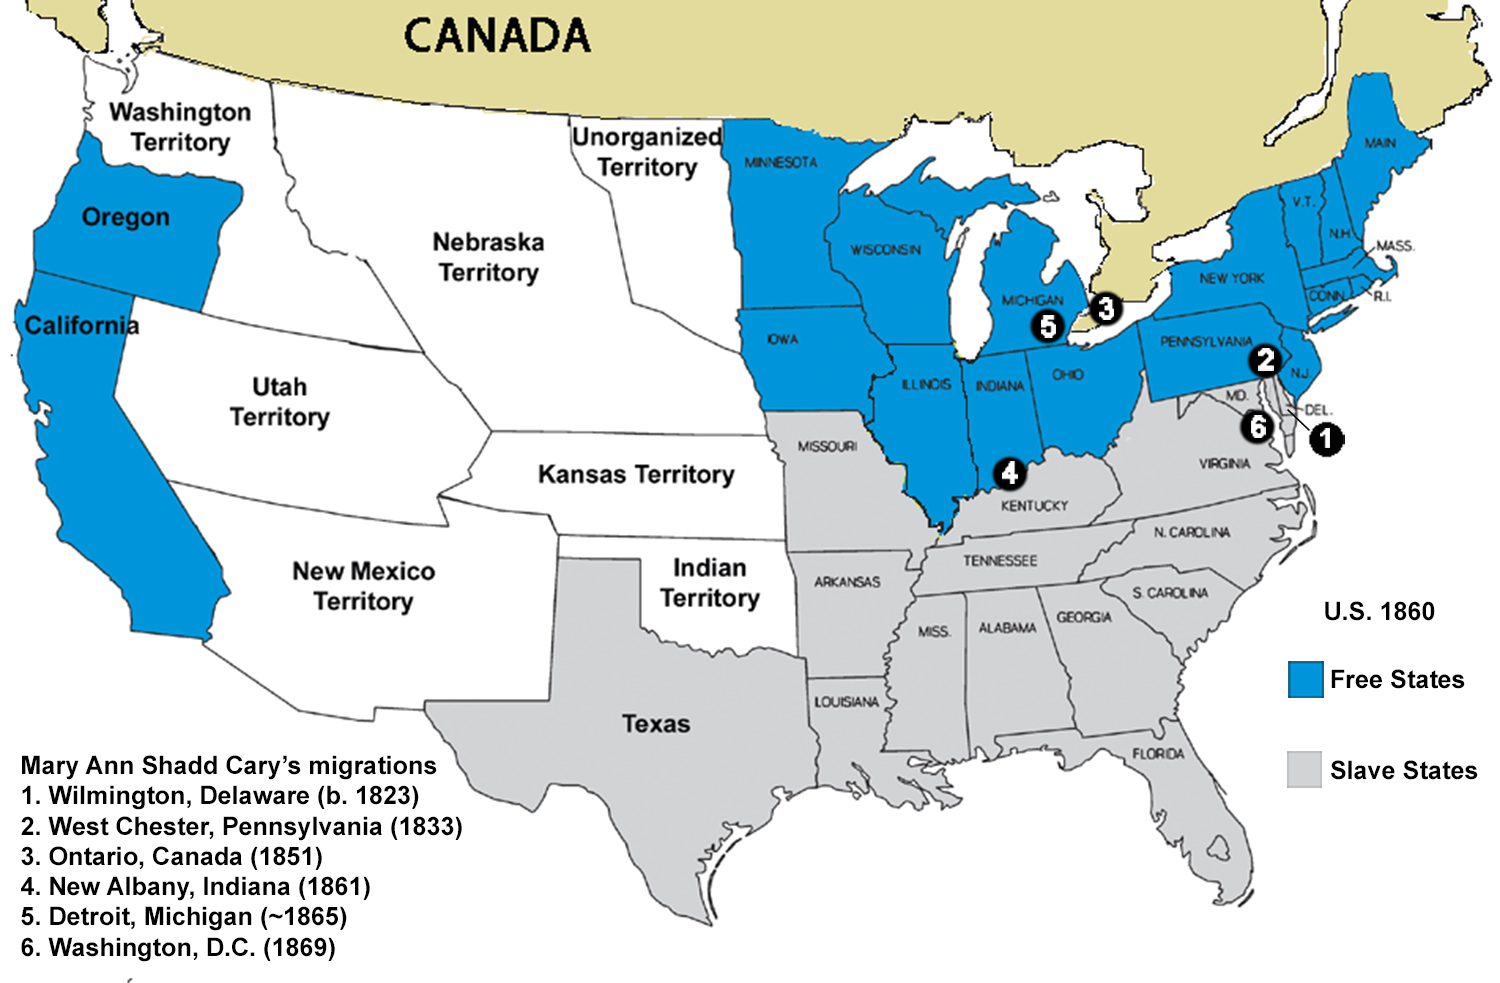 Map of Slave States in 1860 (JPG) for Teaching with Historic Places lesson plan about Mary Ann Shadd Cary